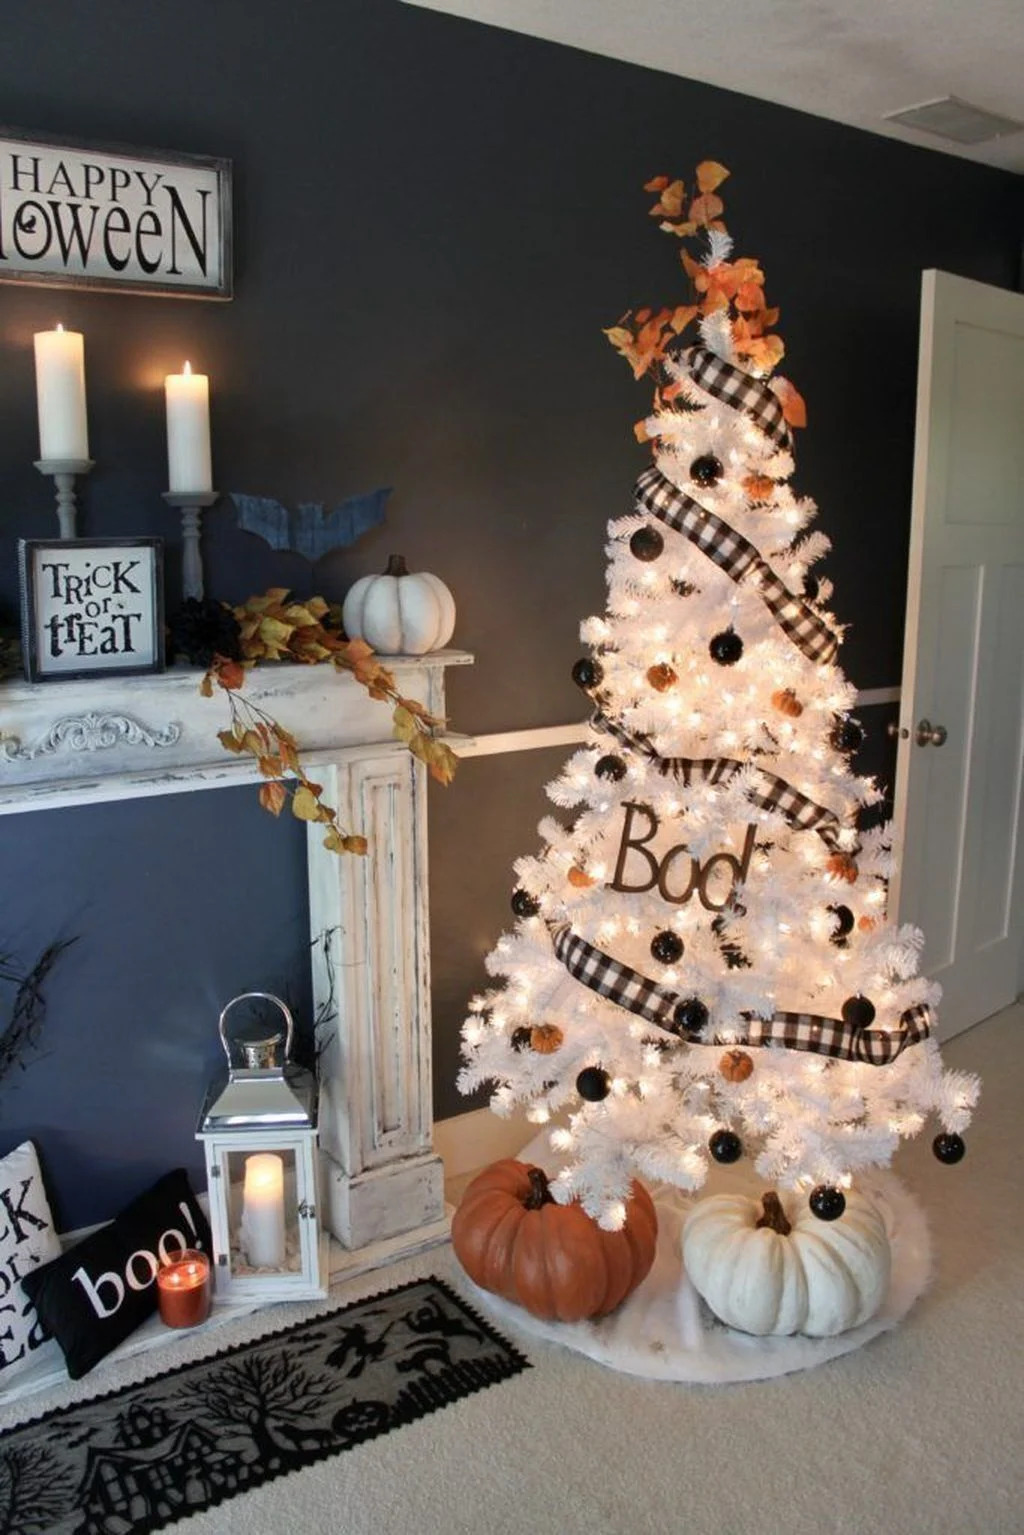  A Halloween Tree With Plaid Ribbons